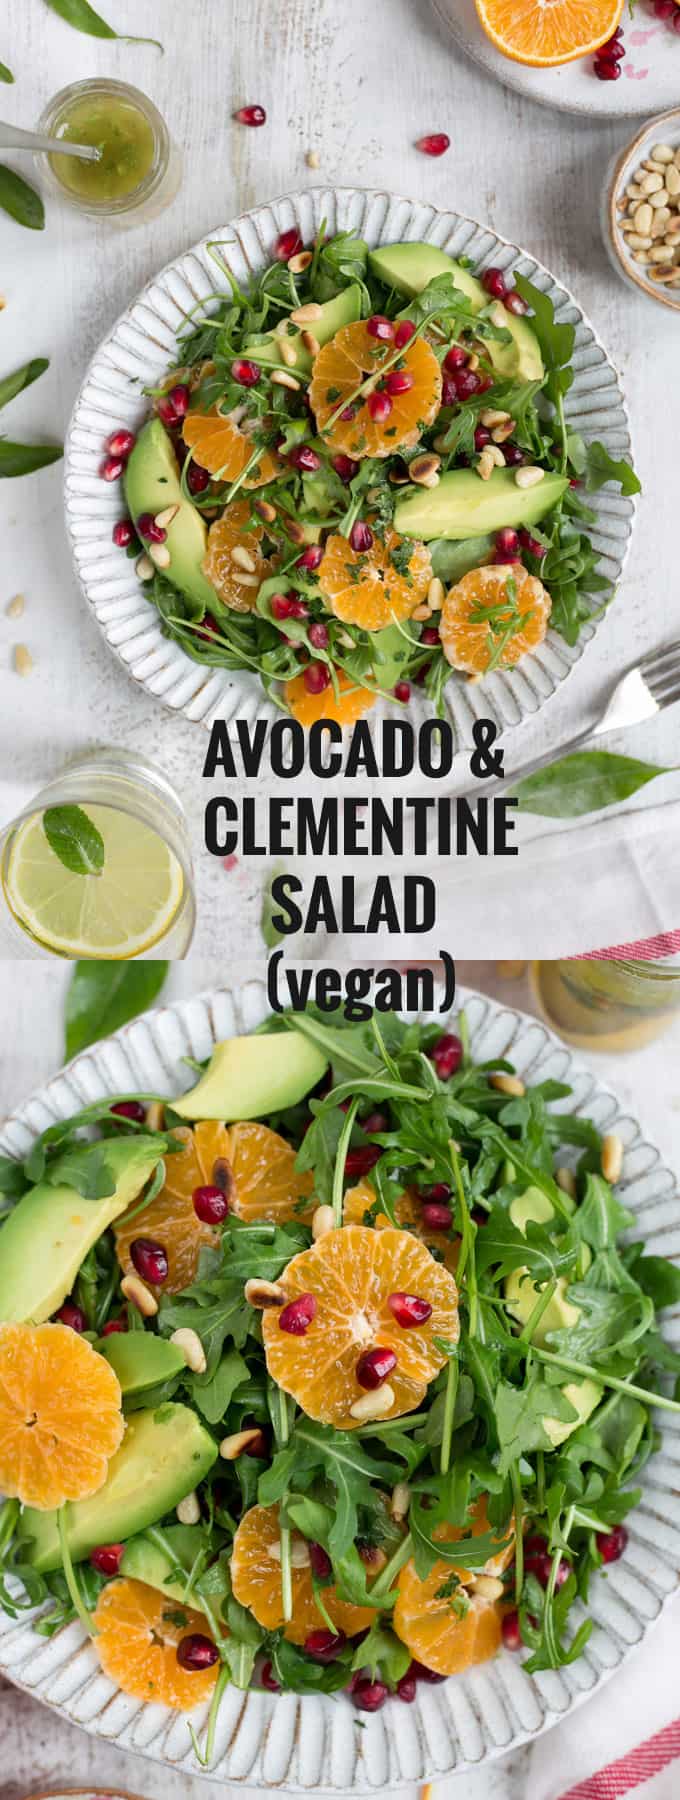 Super- clean avocado and clementine salad with tangy citrus dressing #vegan #dairyfree #healthy | via @annabanana.co 